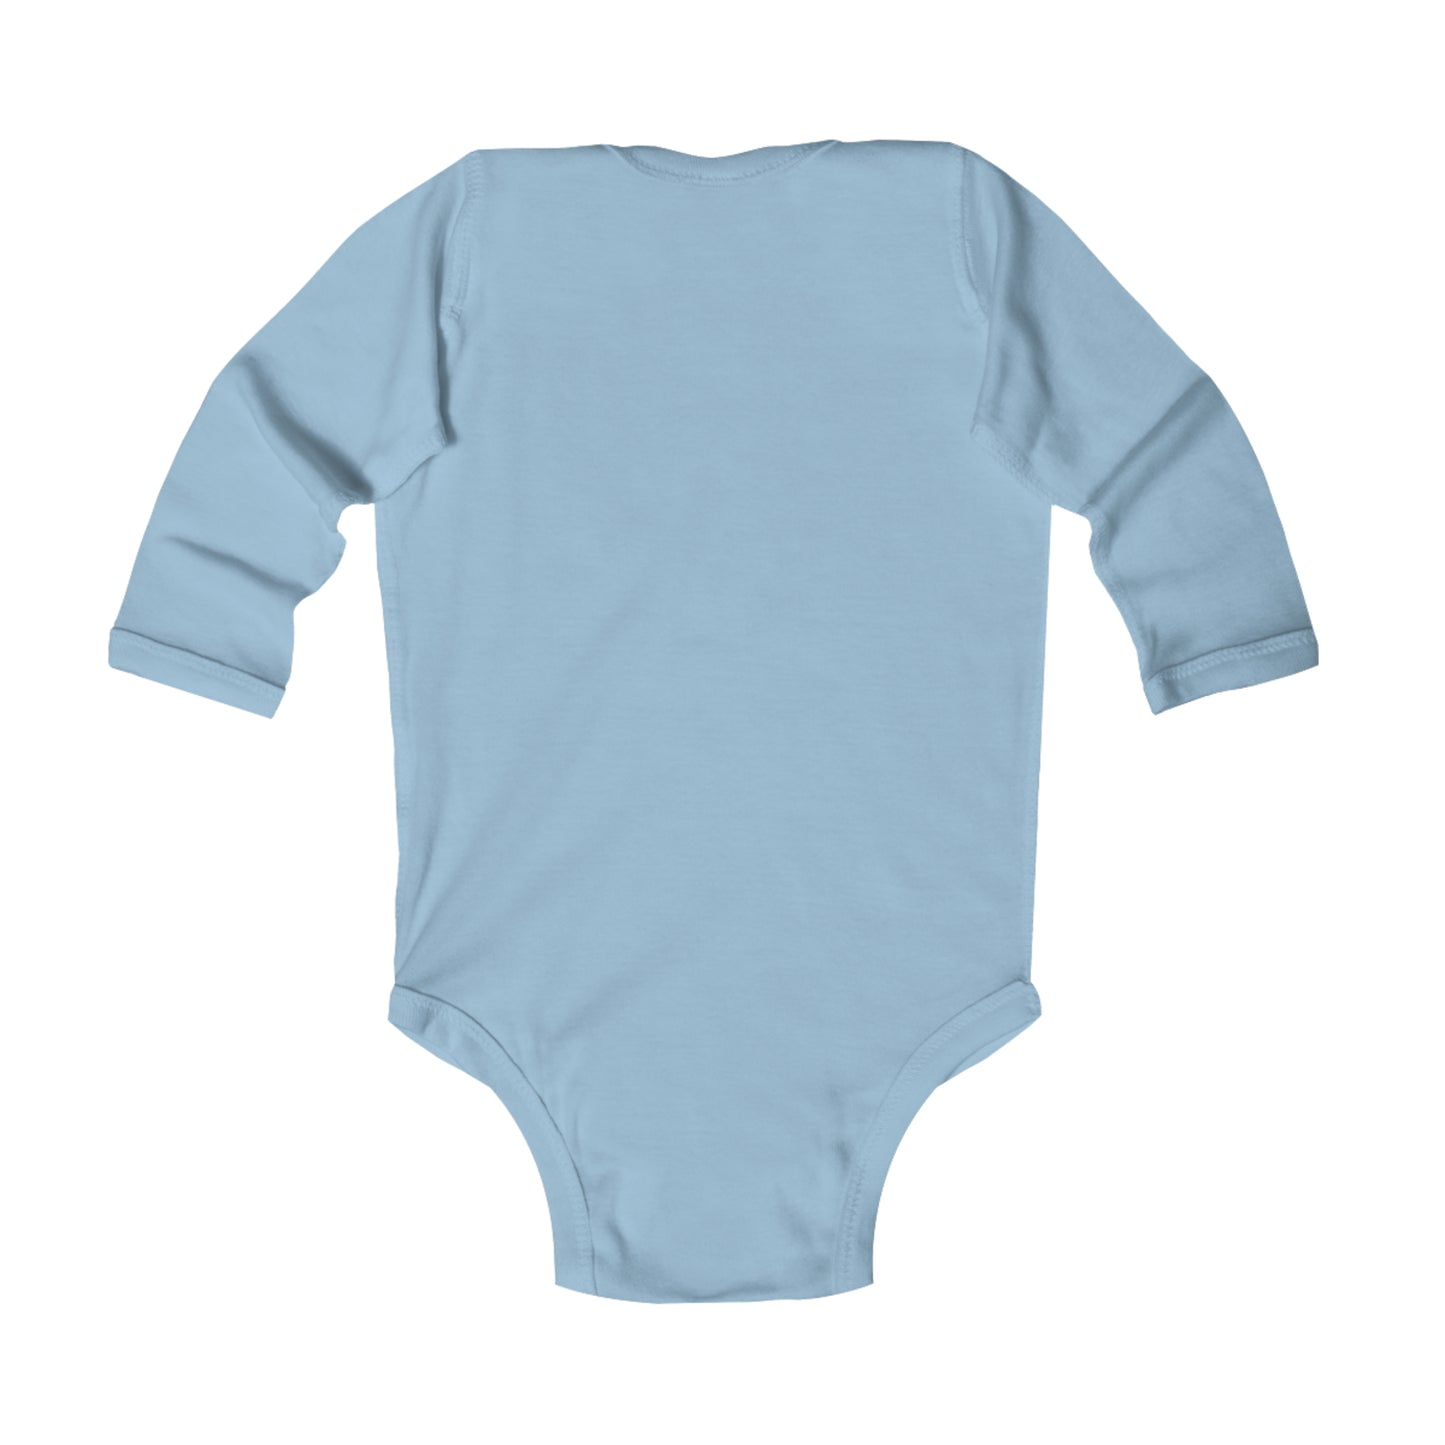 Gifts of Cheer Infant Long Sleeve Bodysuit